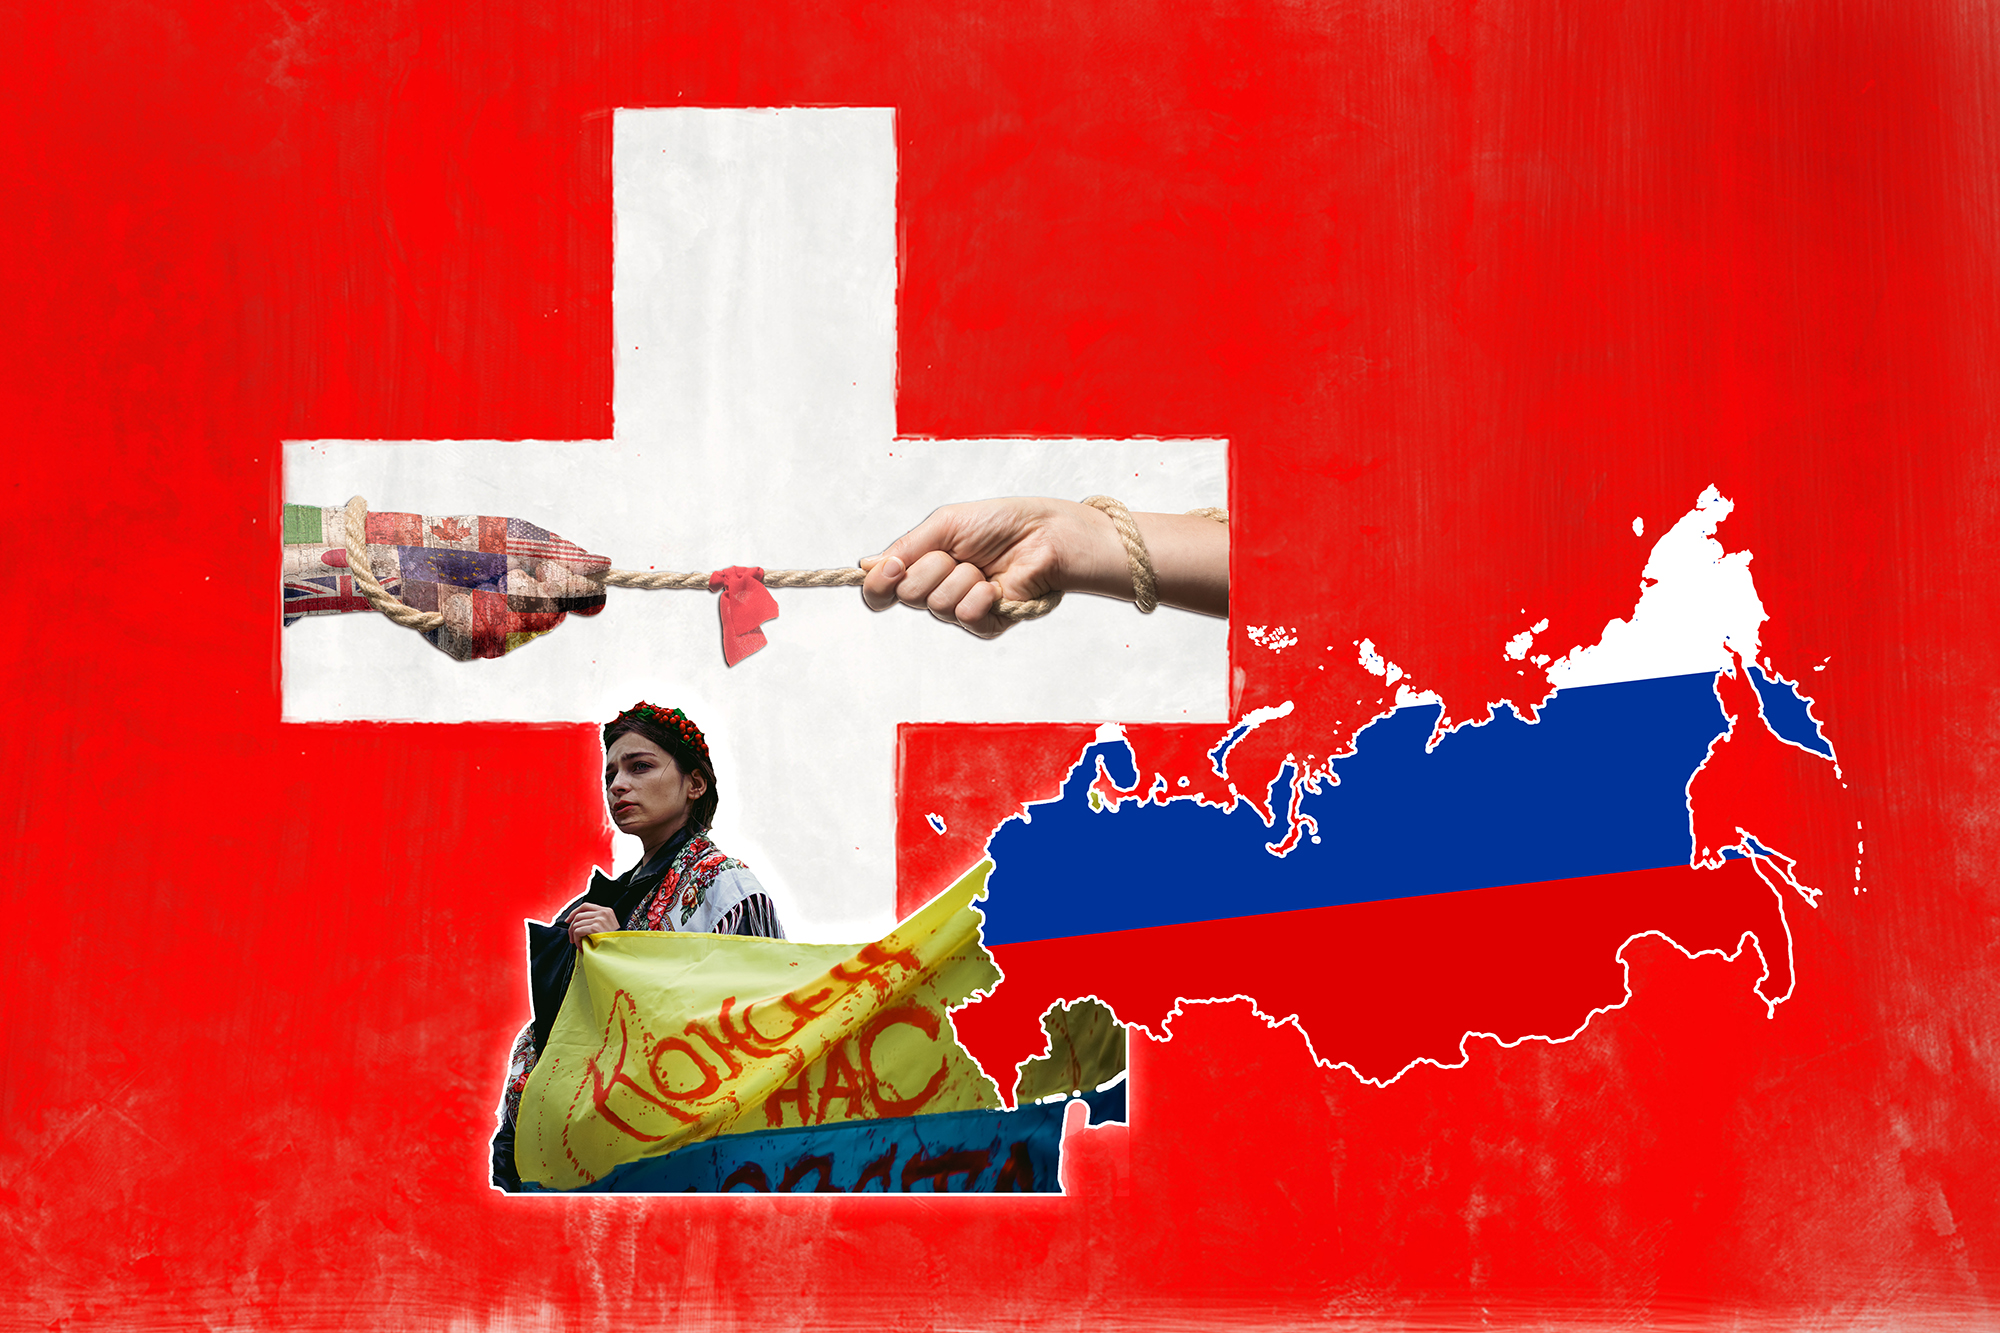 Painted of the Swiss cross. A hand painted with G7 flags in tug of war. A Ukranian protestor map of Russia